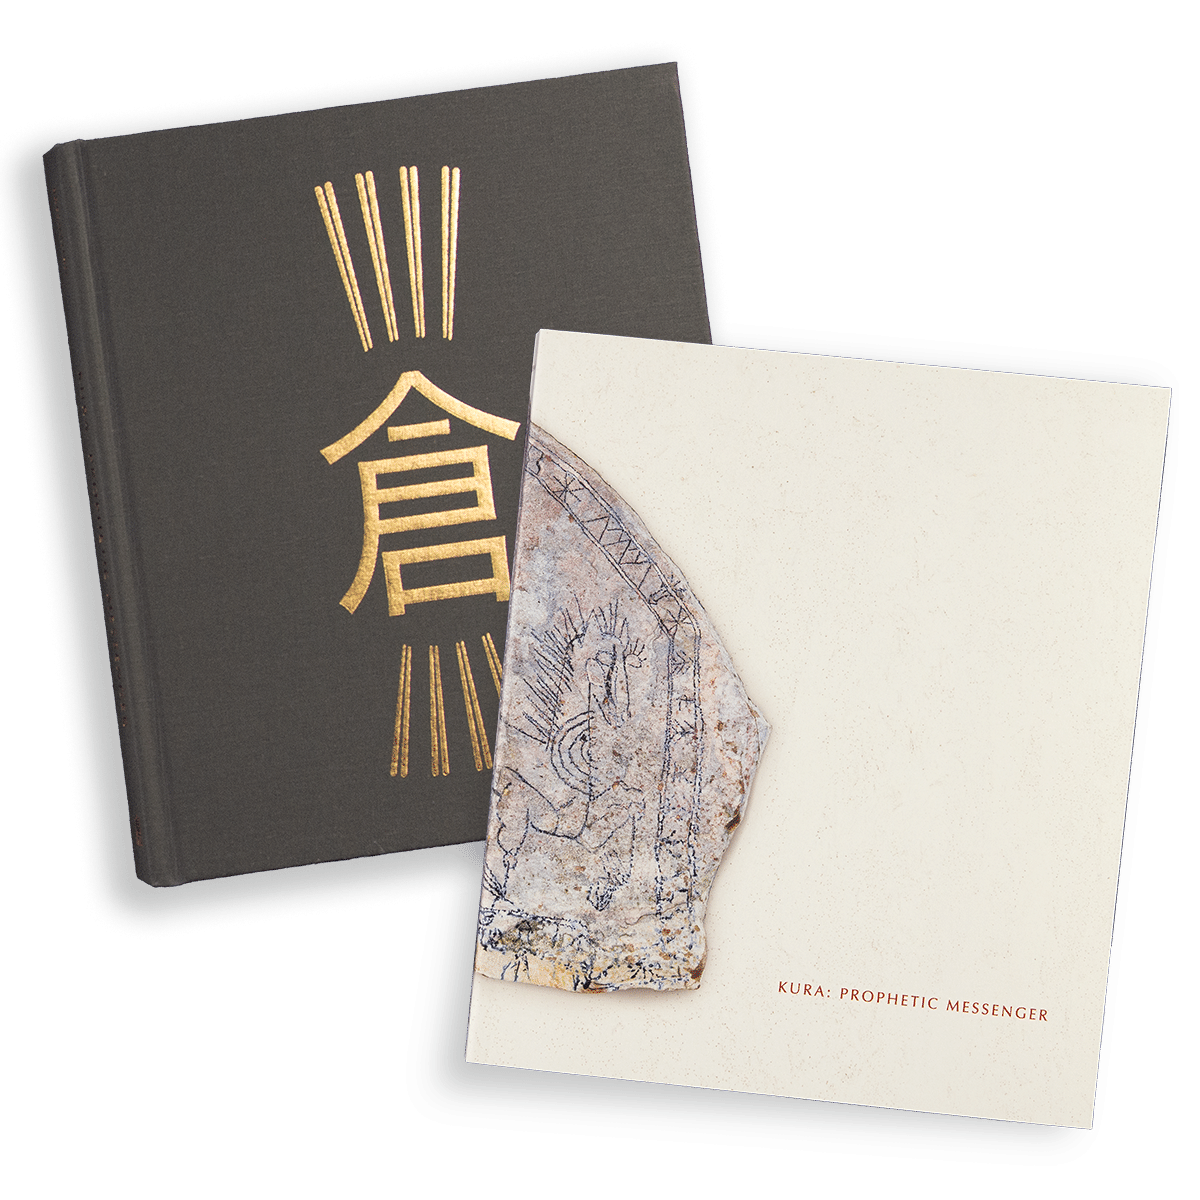 Showing the hardcover's foil stamping and the printed dust jacket/soft cover